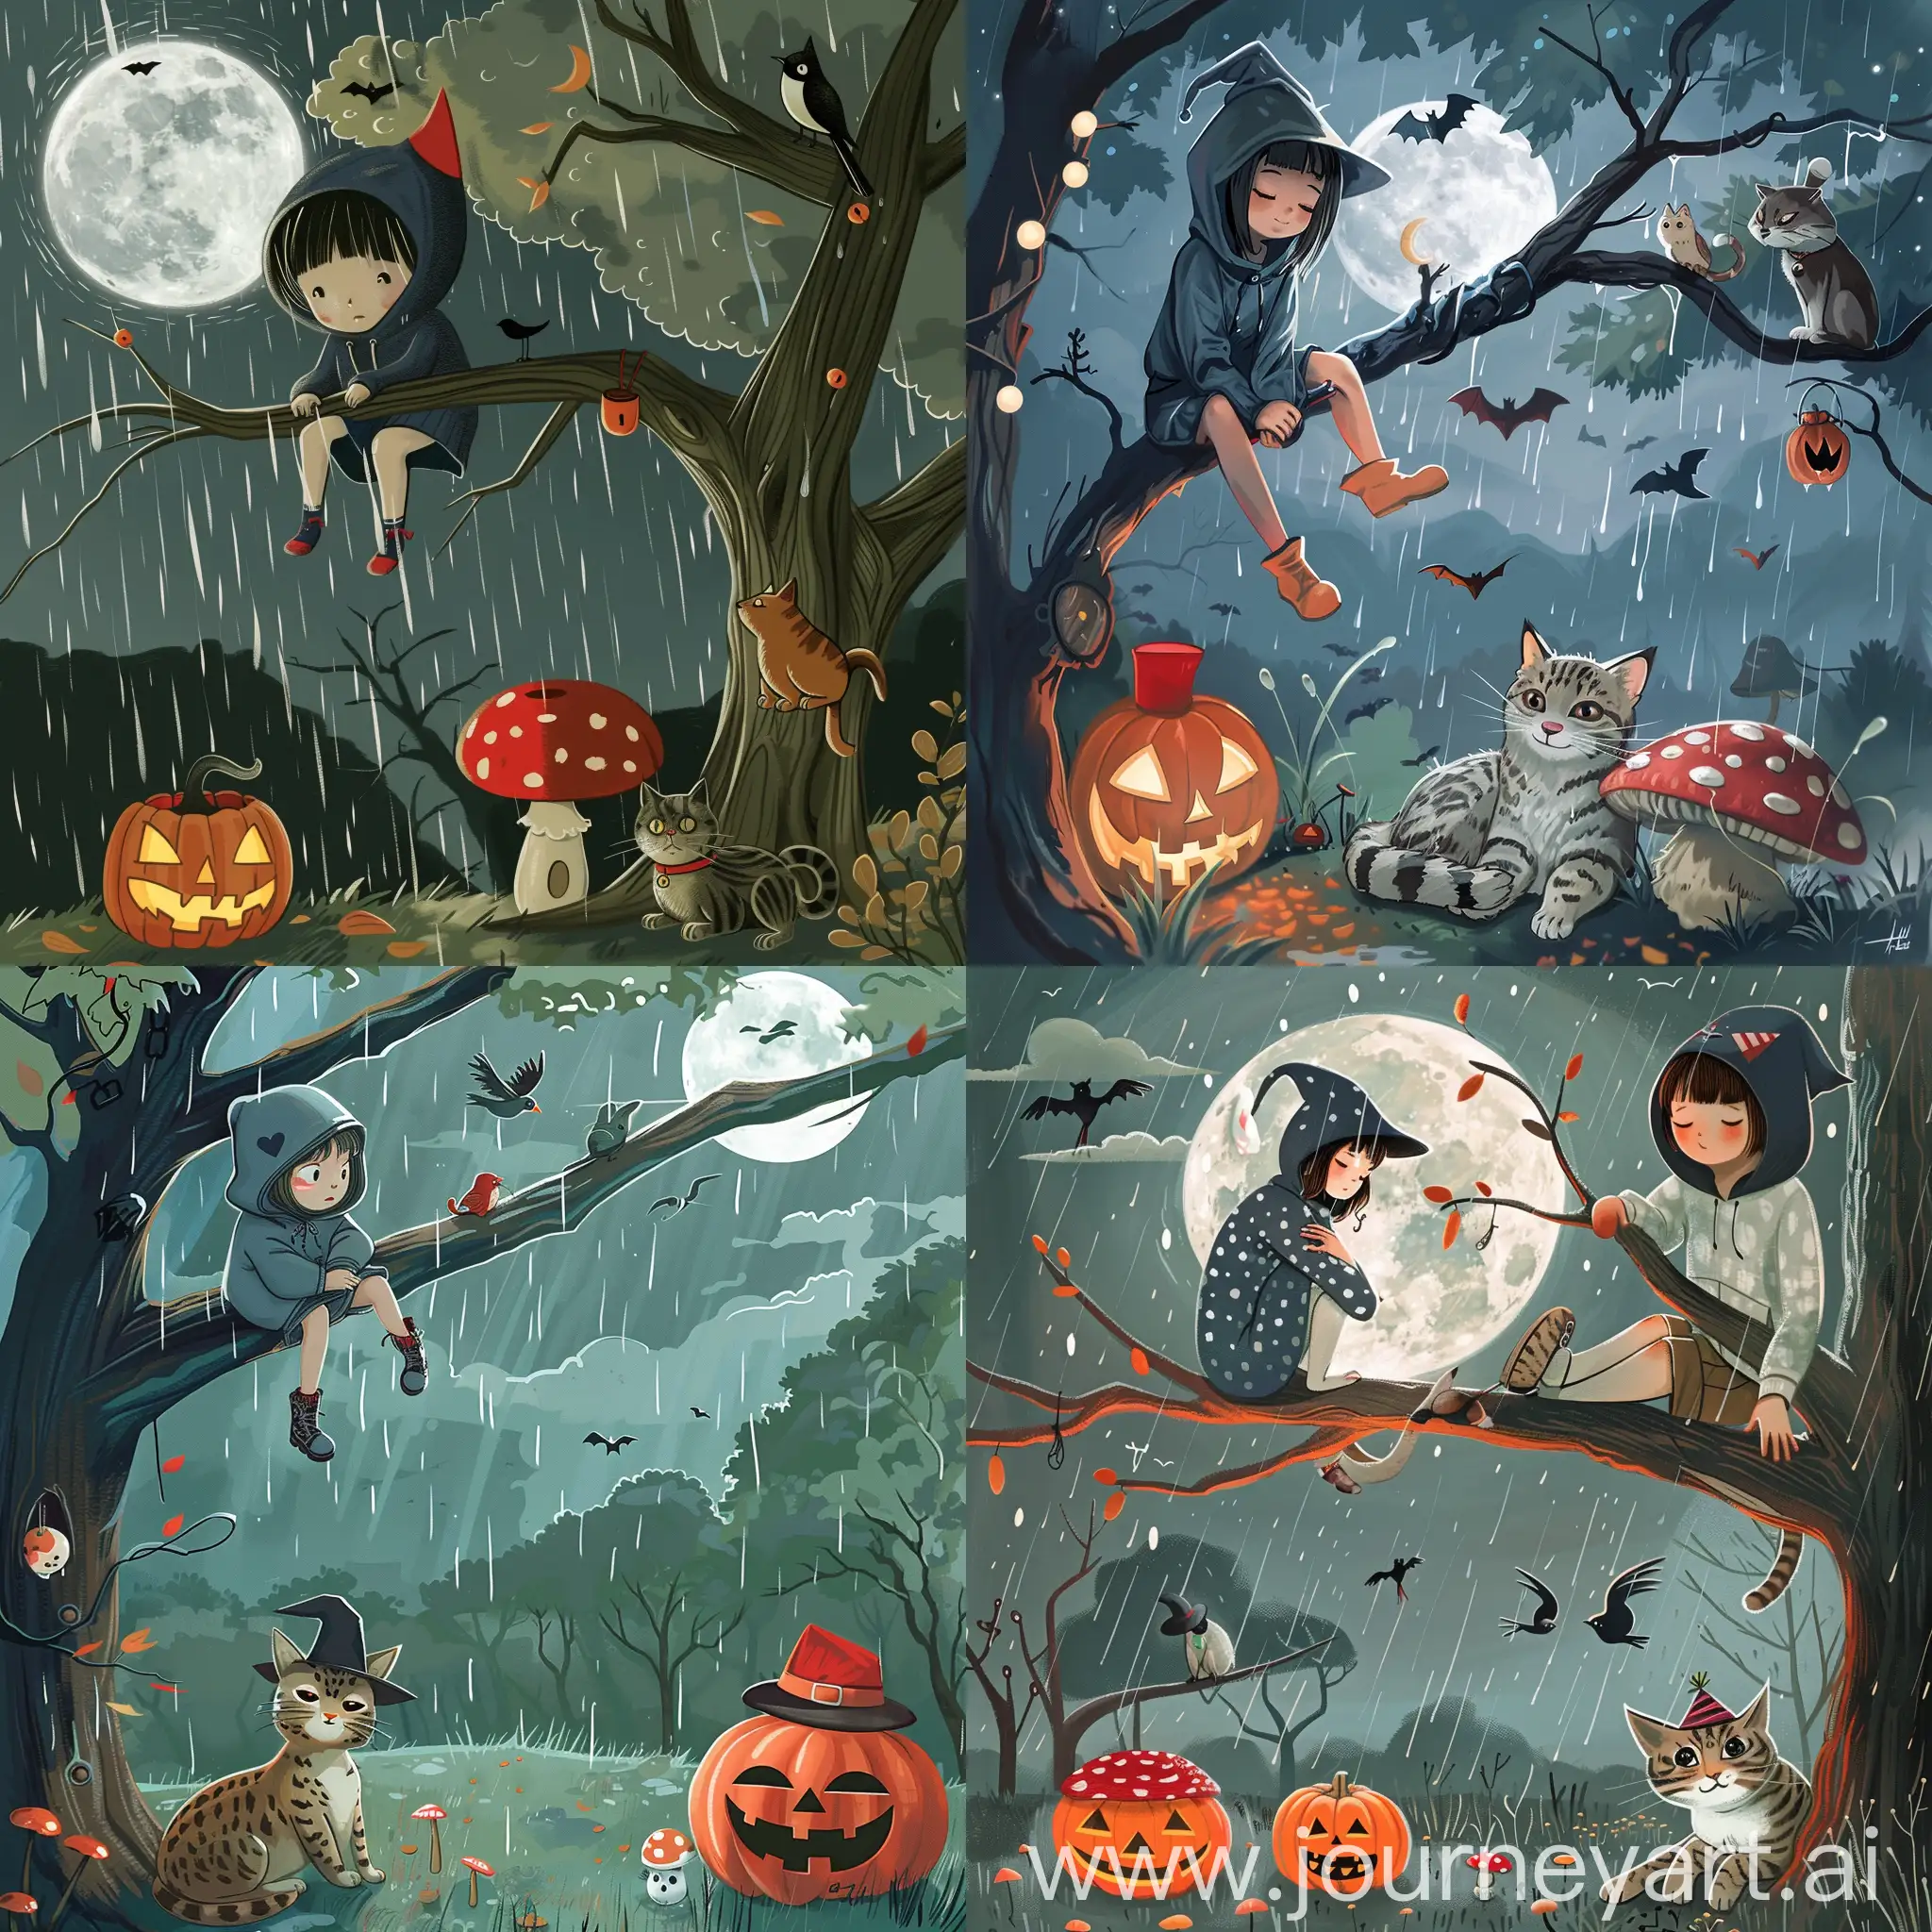 Studio Ghibli style moonlit woodland scene with young girl wearing hoodie and witches hat sitting high on a branch in a tree with a wildcat sitting next to her. It is raining, the moon is full and there are birds overhead, on the ground is a jack o lantern and a cartoon mushroom with a red top and white spots